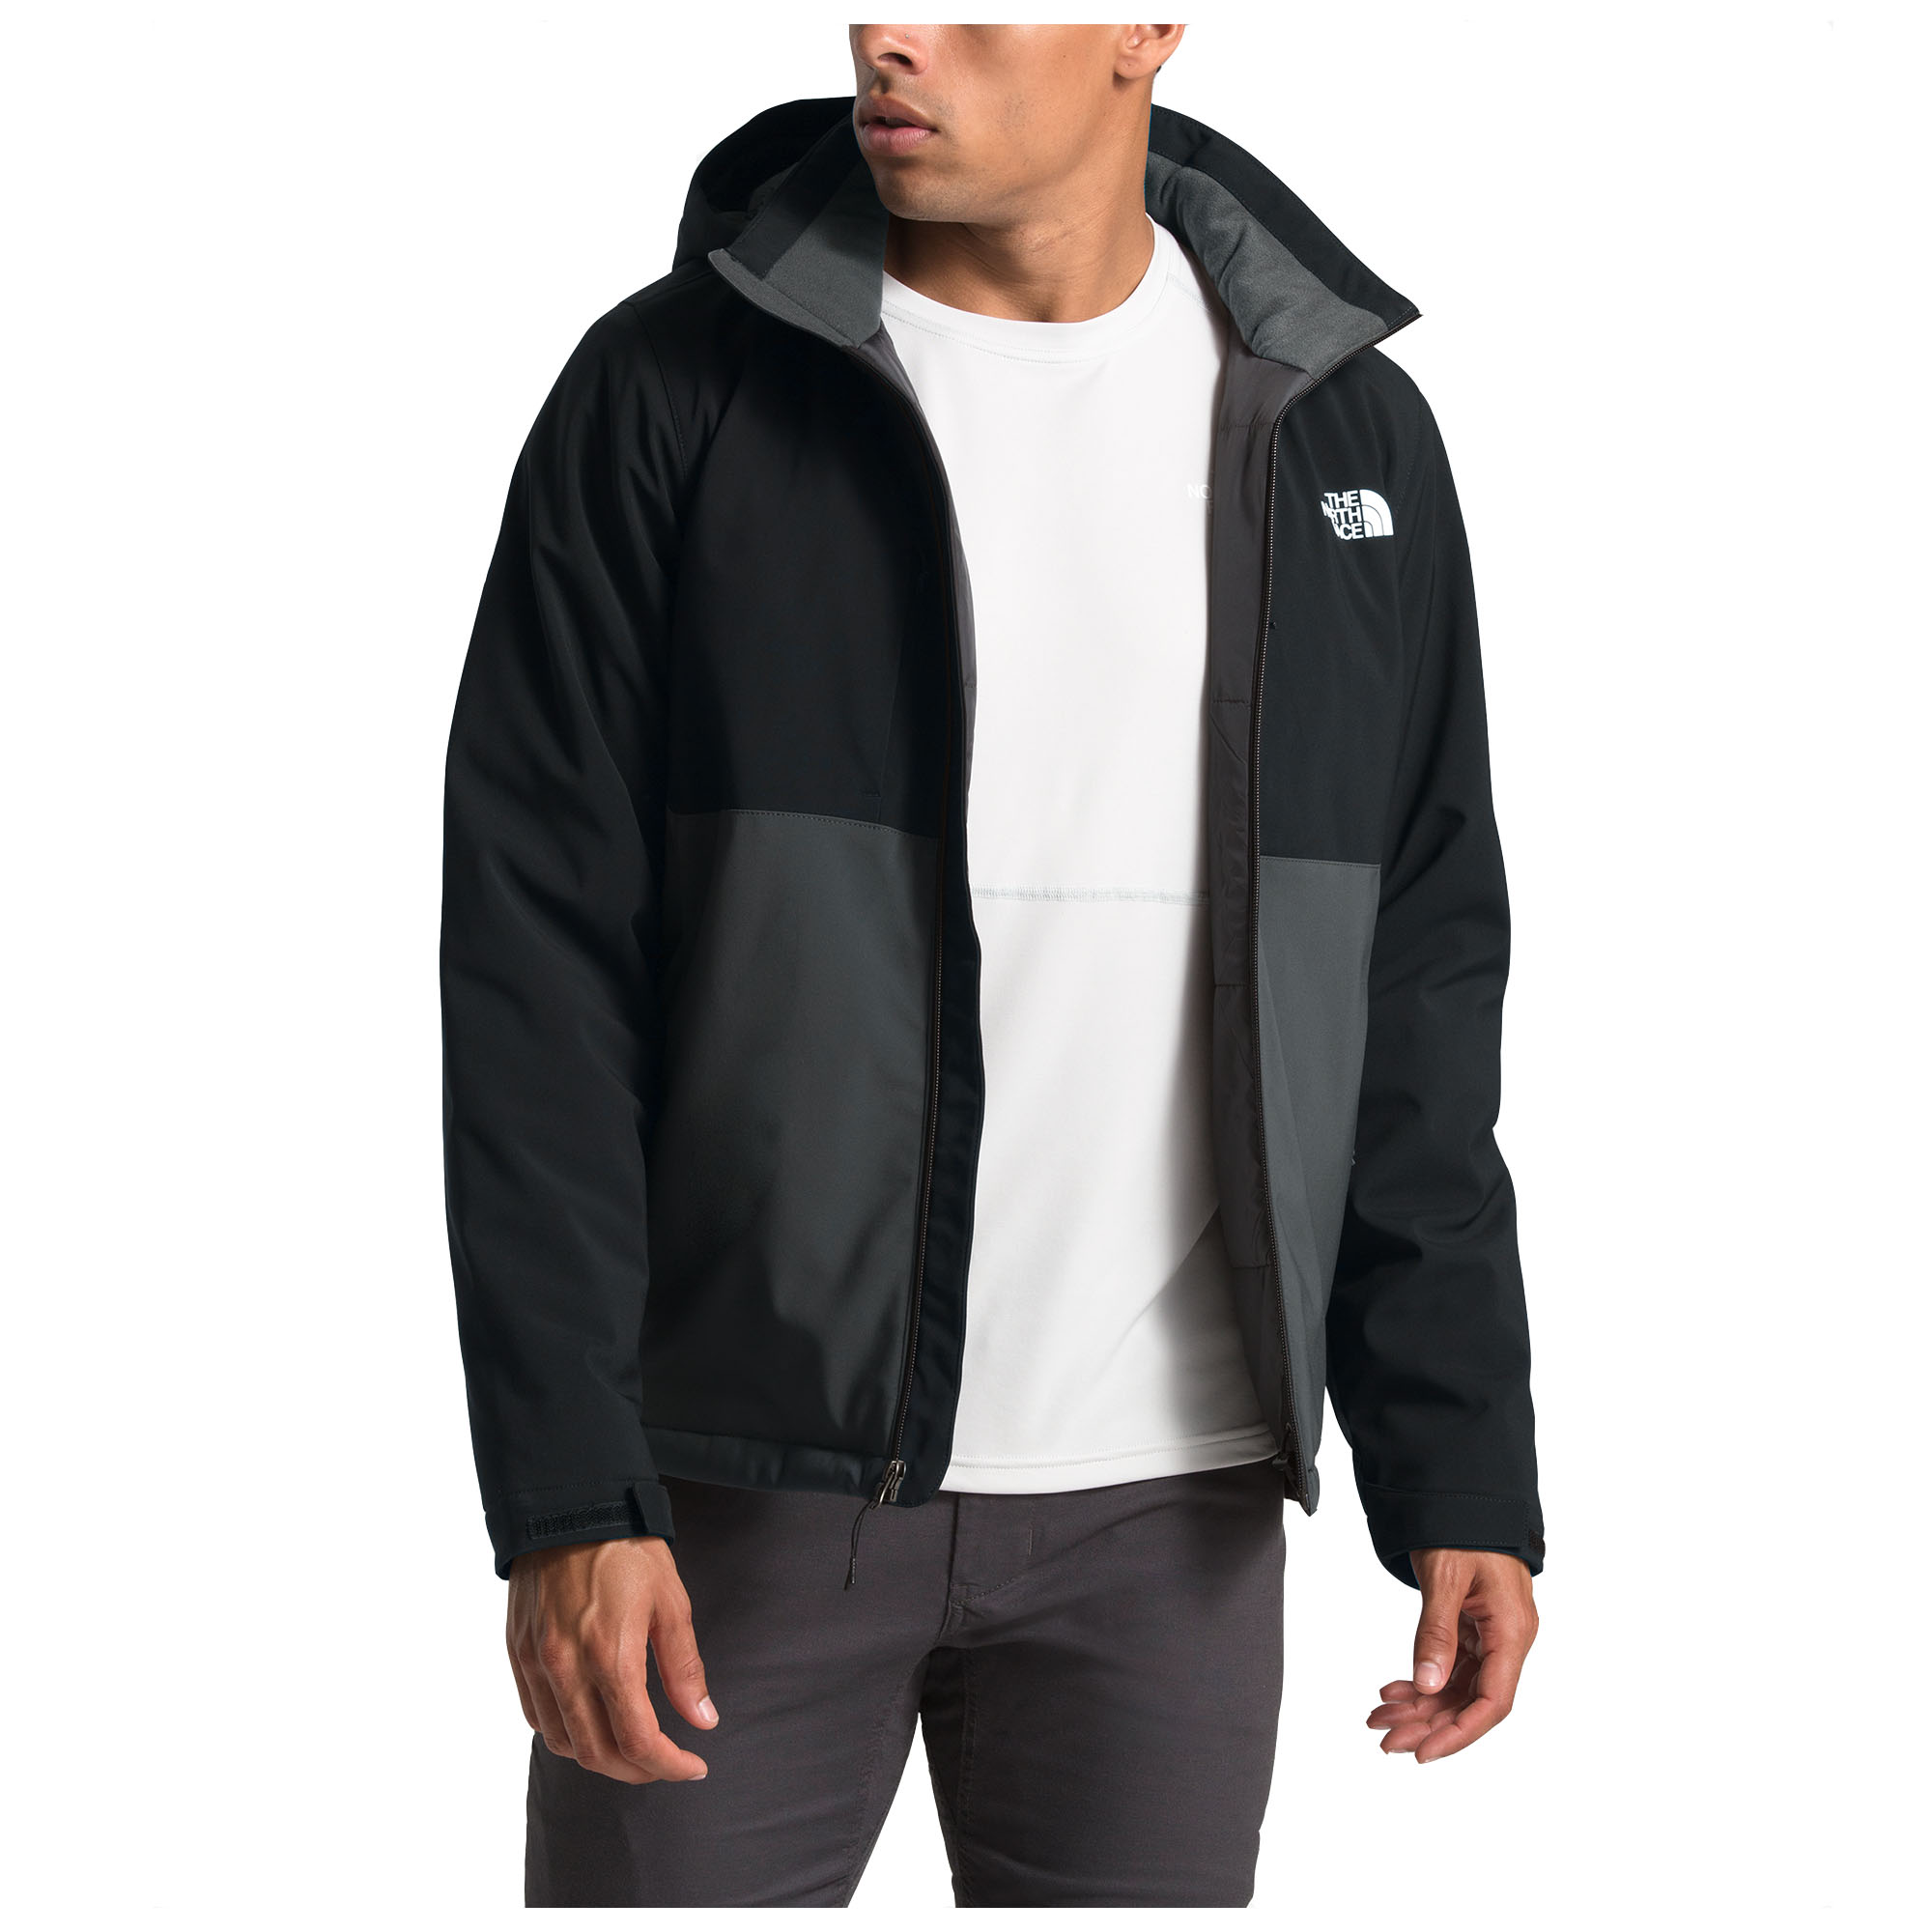 north face apex elevation womens